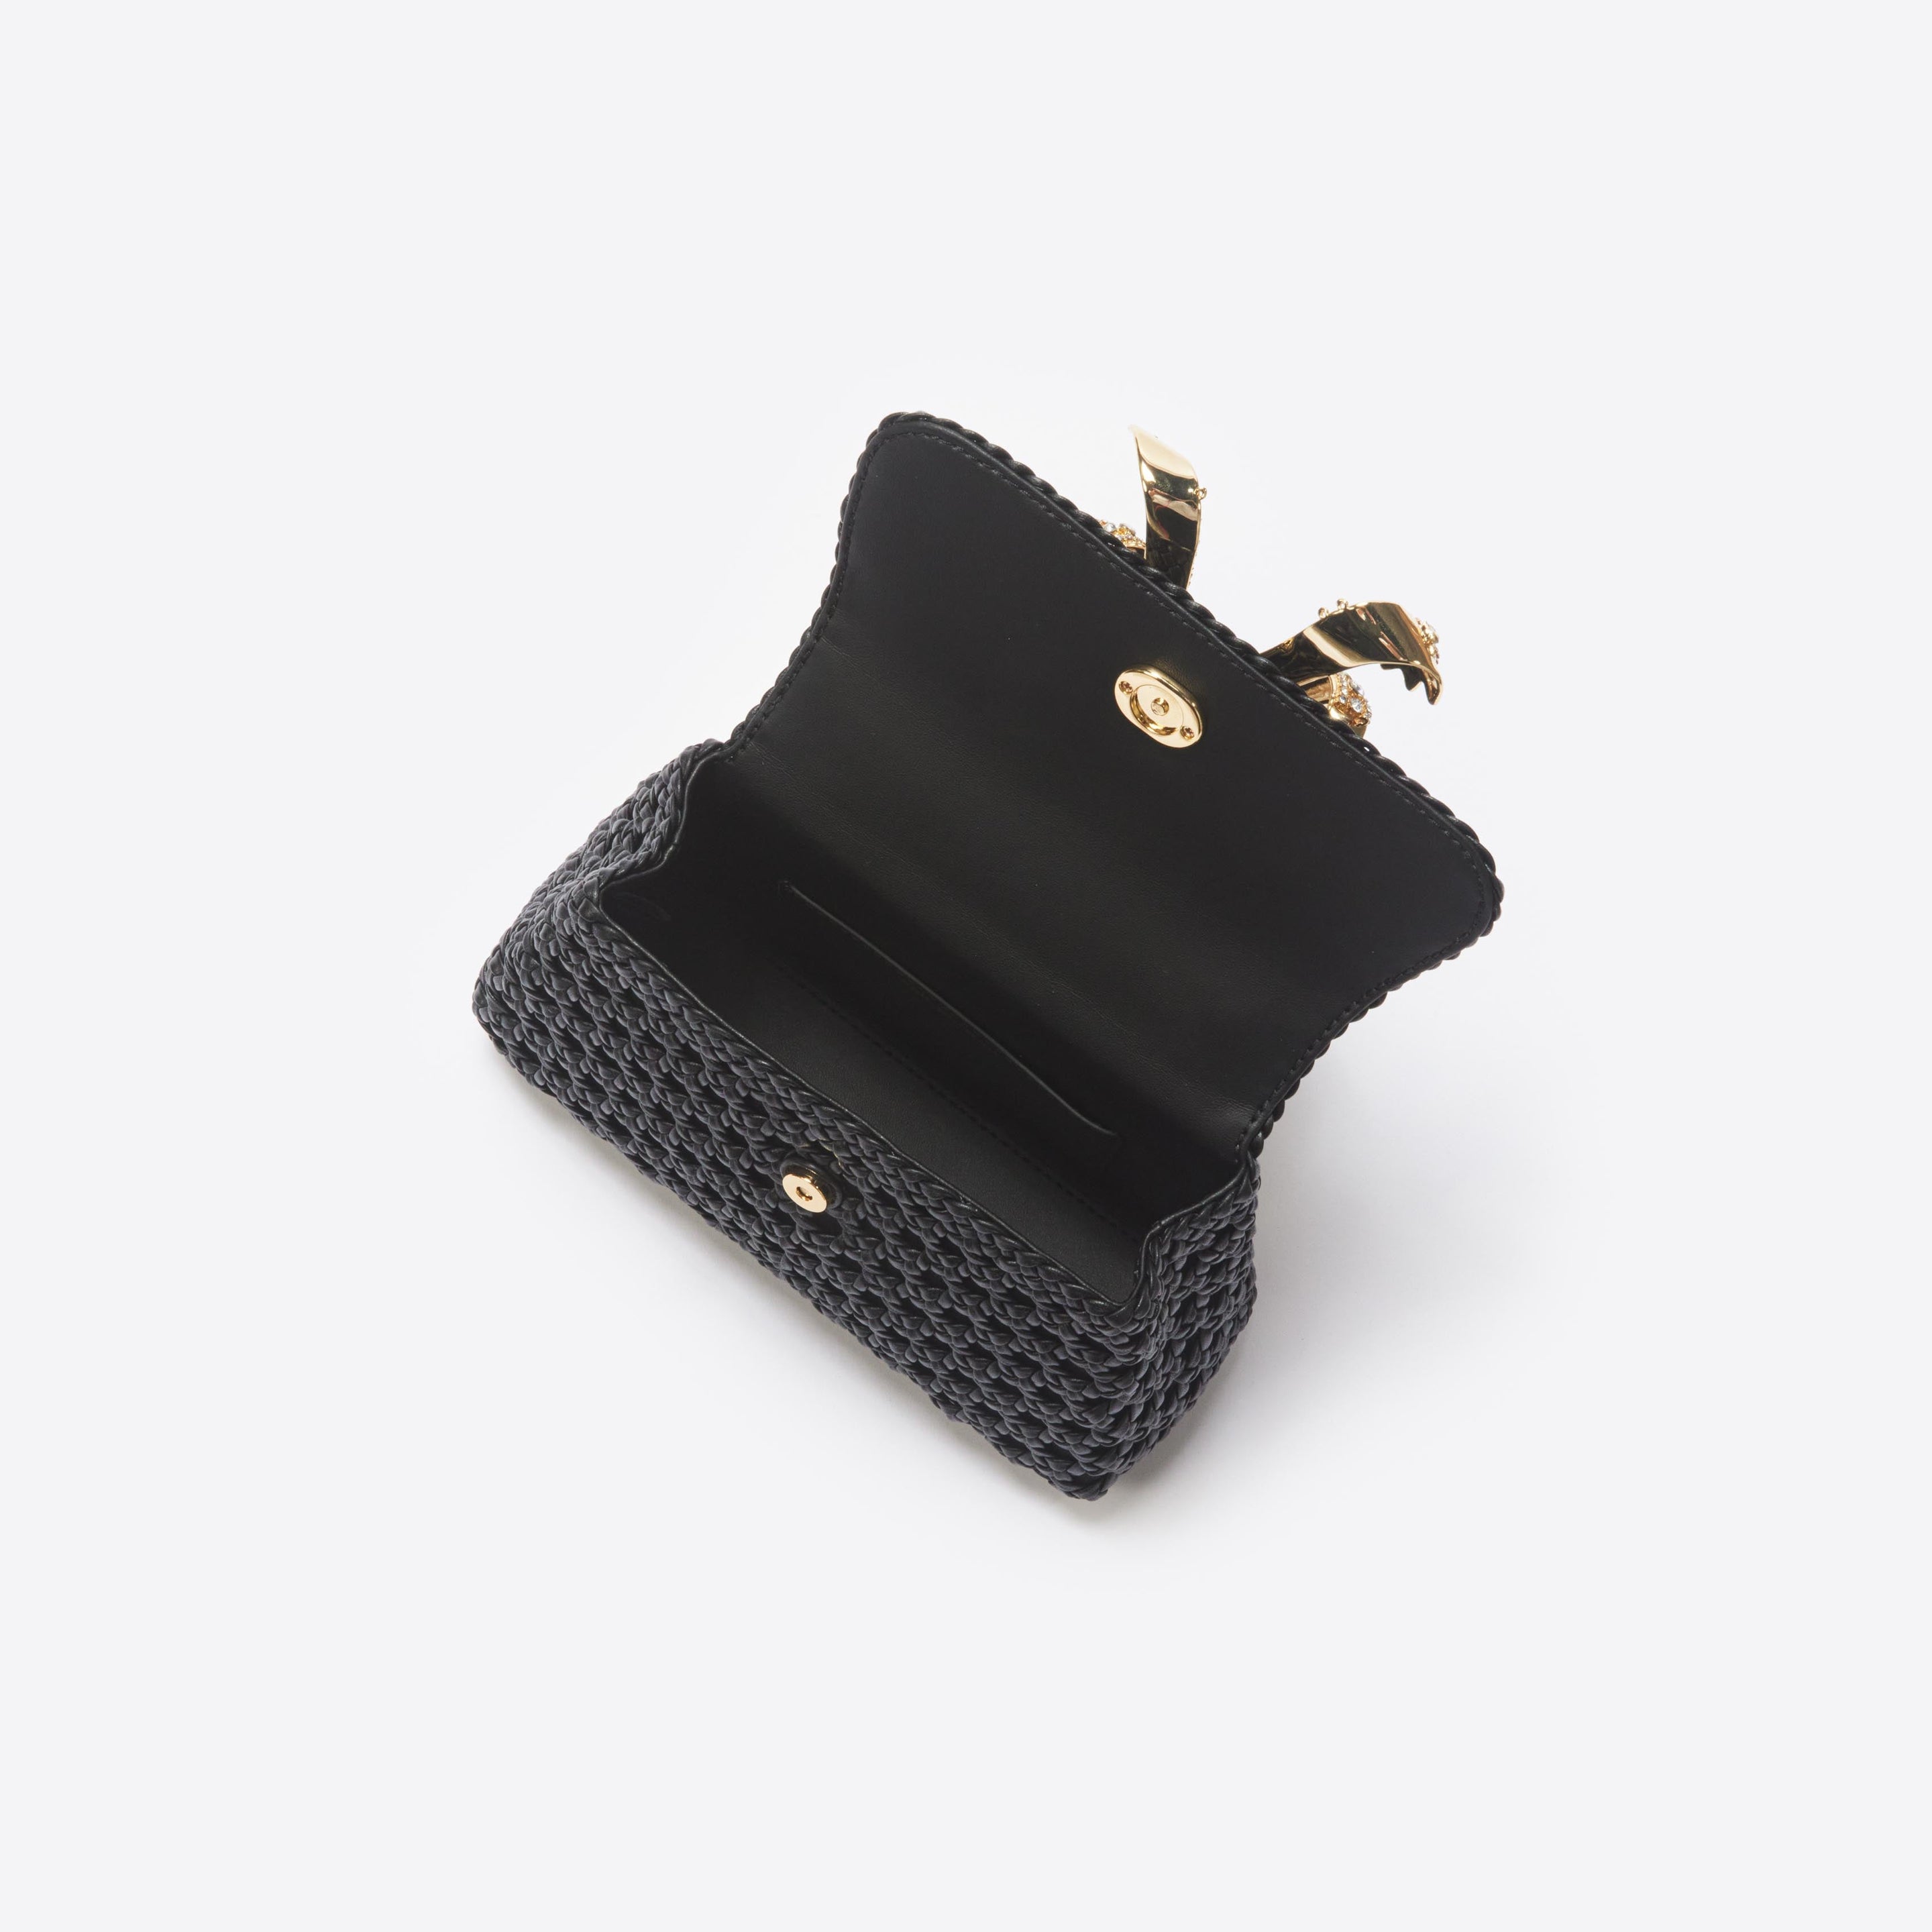 Leather Woven Gold Chain Purse Black